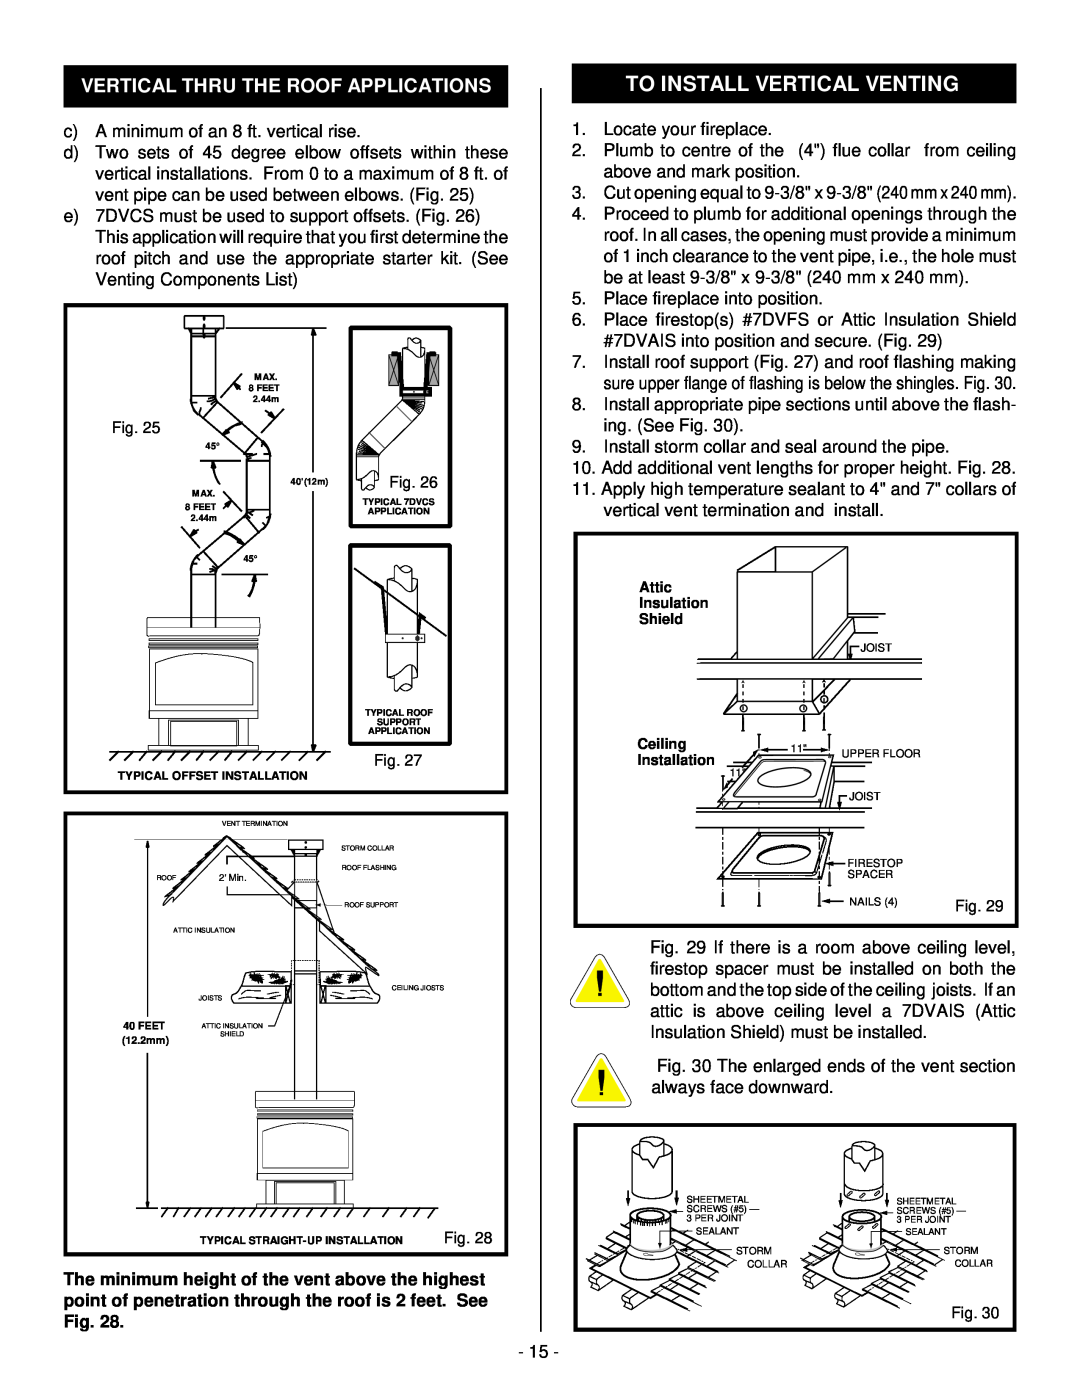 Vermont Casting D232 installation instructions To Install Vertical Venting, Vertical Thru The Roof Applications 